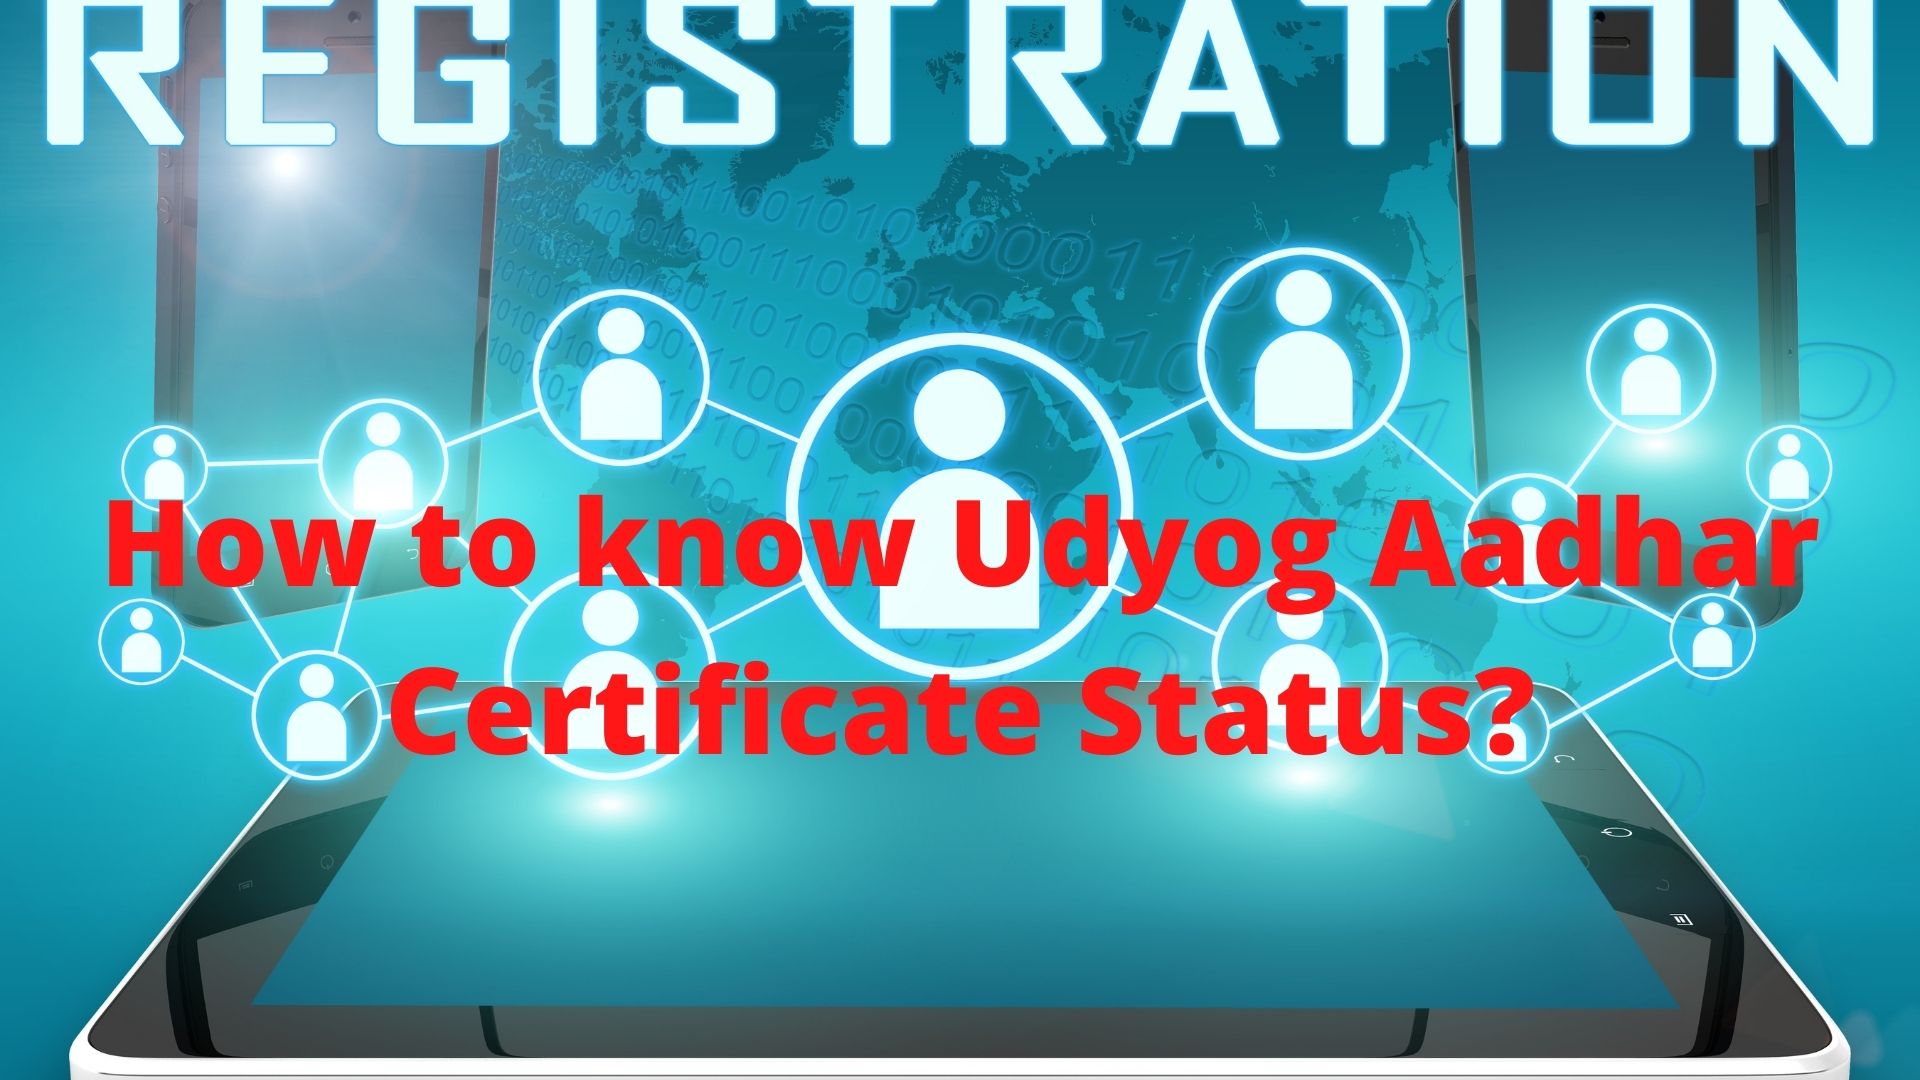 How to know Udyog Aadhar Certificate Status?